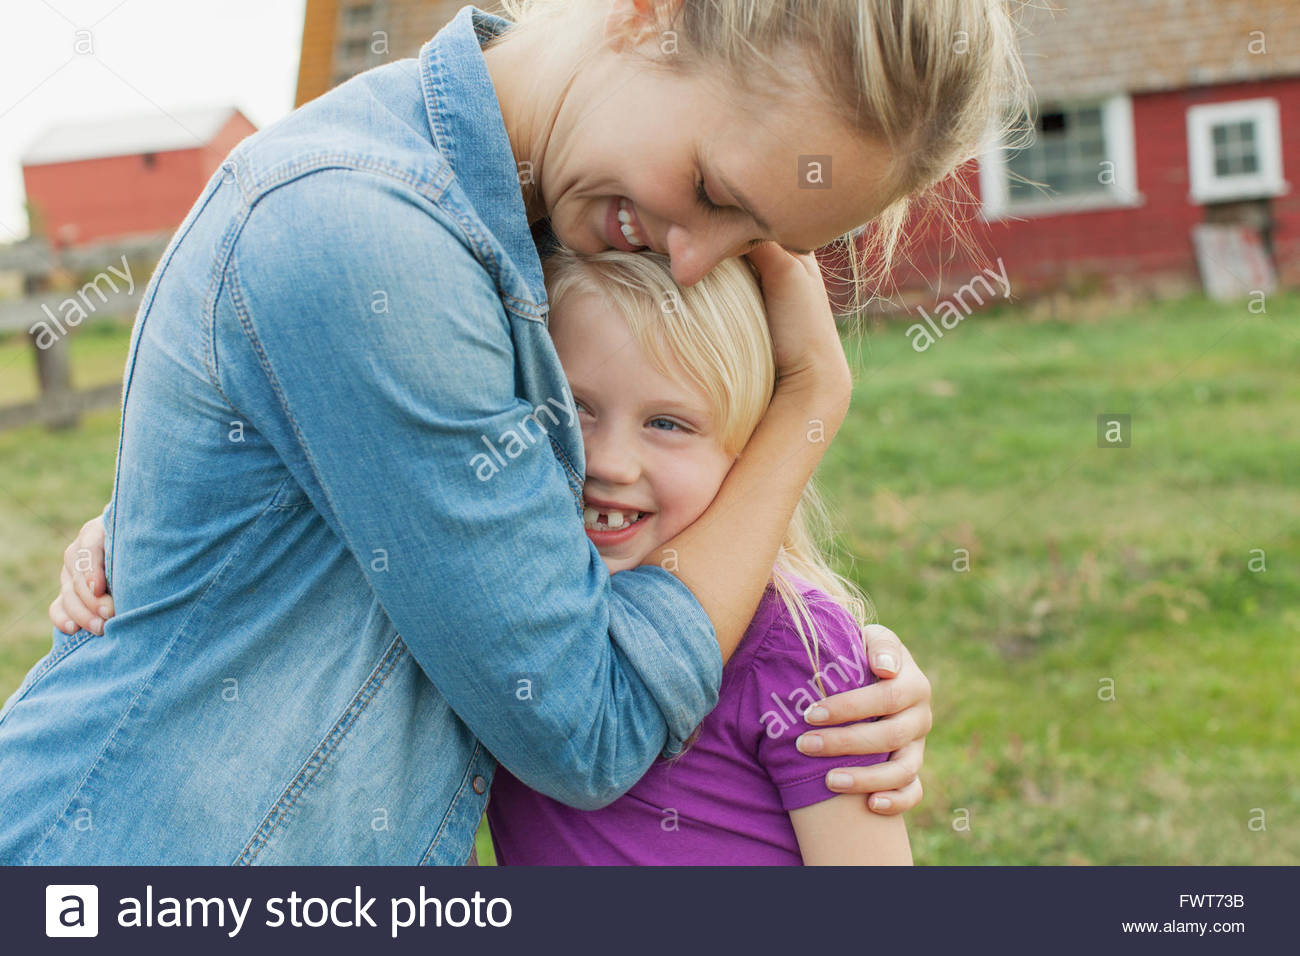 Mother and young daughter hugging outdoors. Stock Photo